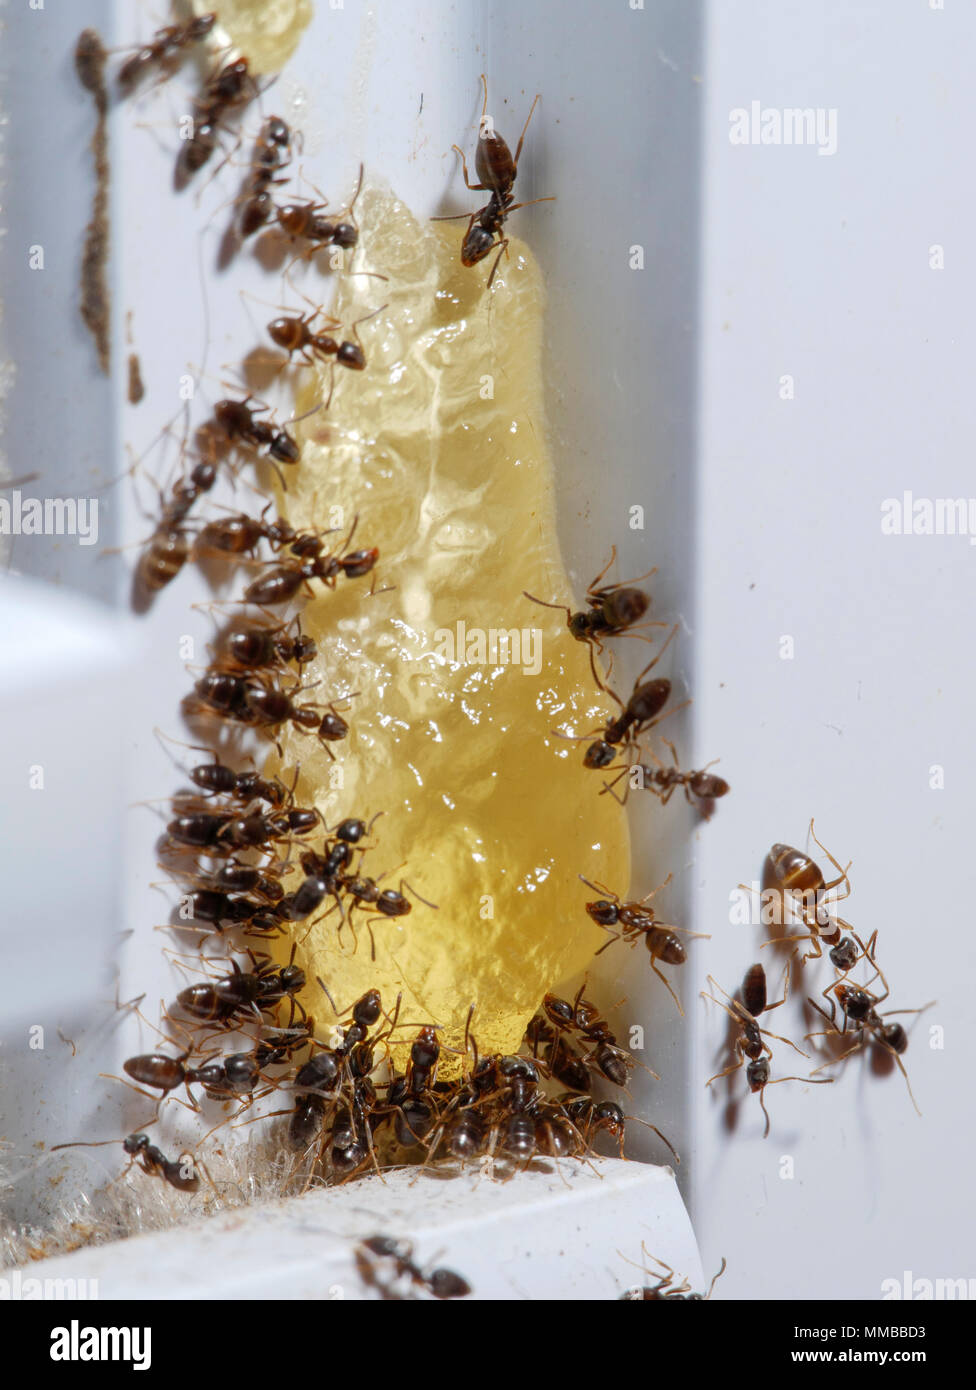 https://c8.alamy.com/comp/MMBBD3/invasive-argentine-ants-linepithema-humile-eating-commercial-ant-bait-containing-fipronil-MMBBD3.jpg